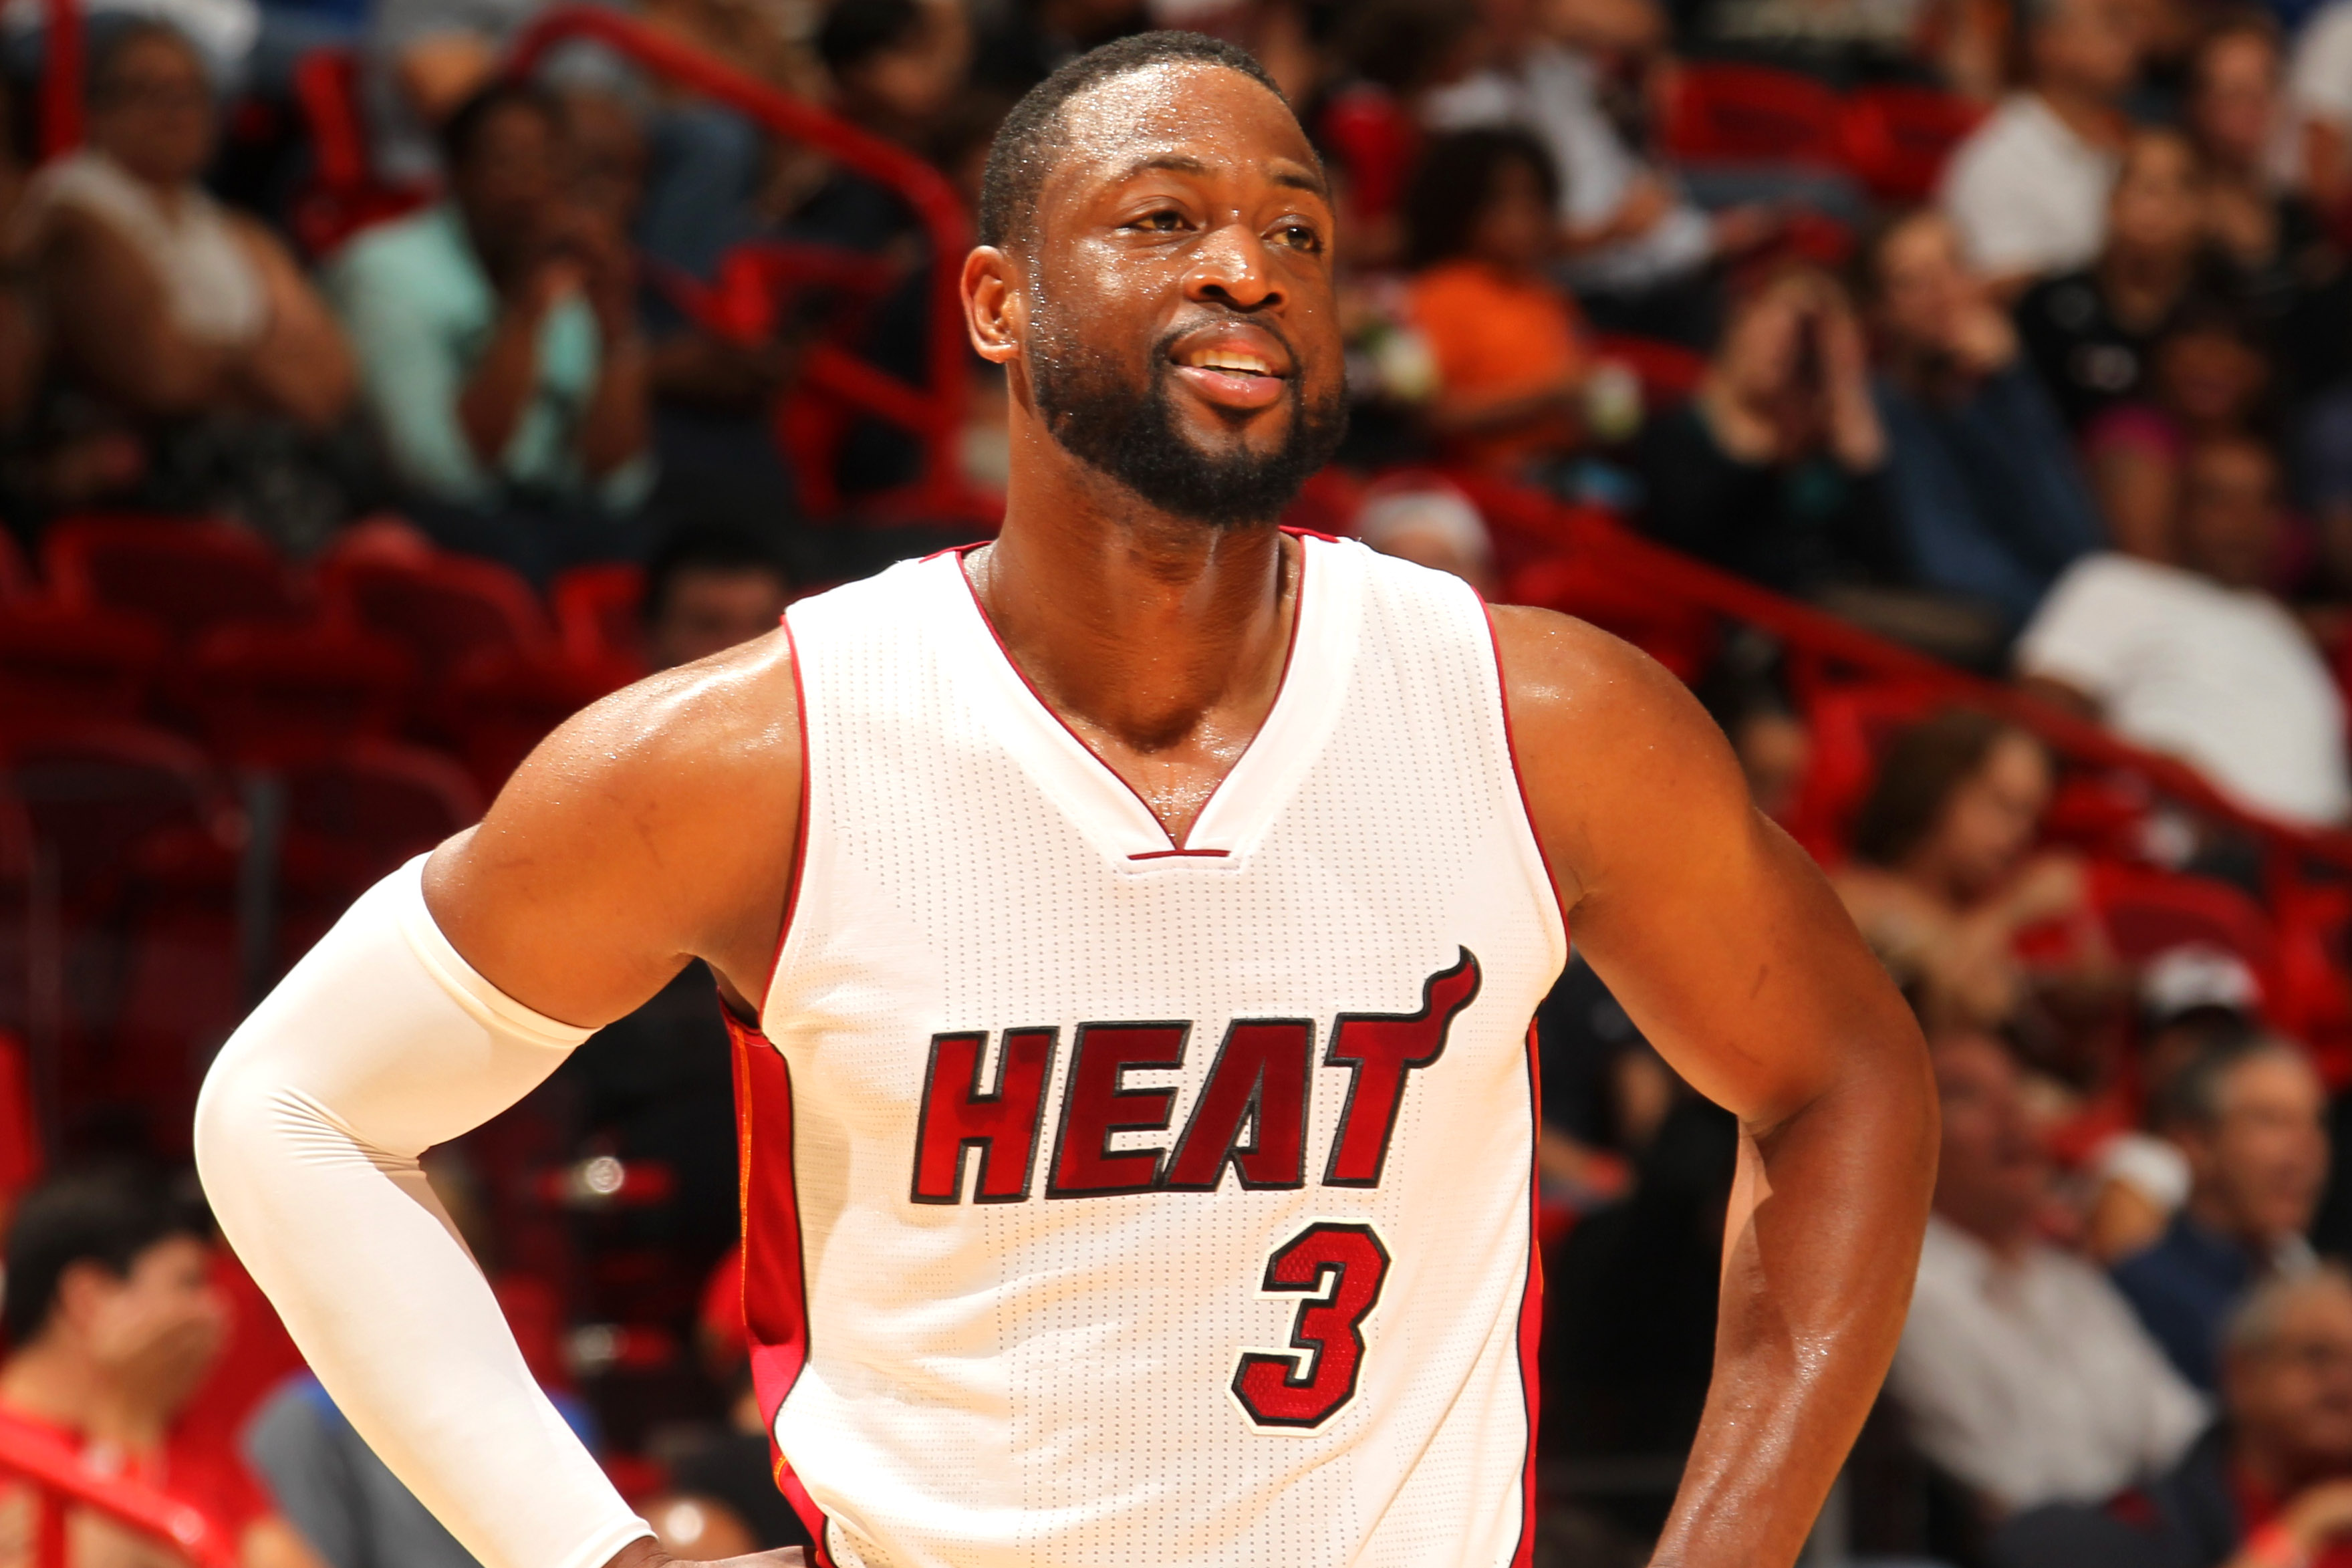 zaire blessing dwyane wade wallpapers wallpaper cave on zaire blessing dwyane wade wallpapers